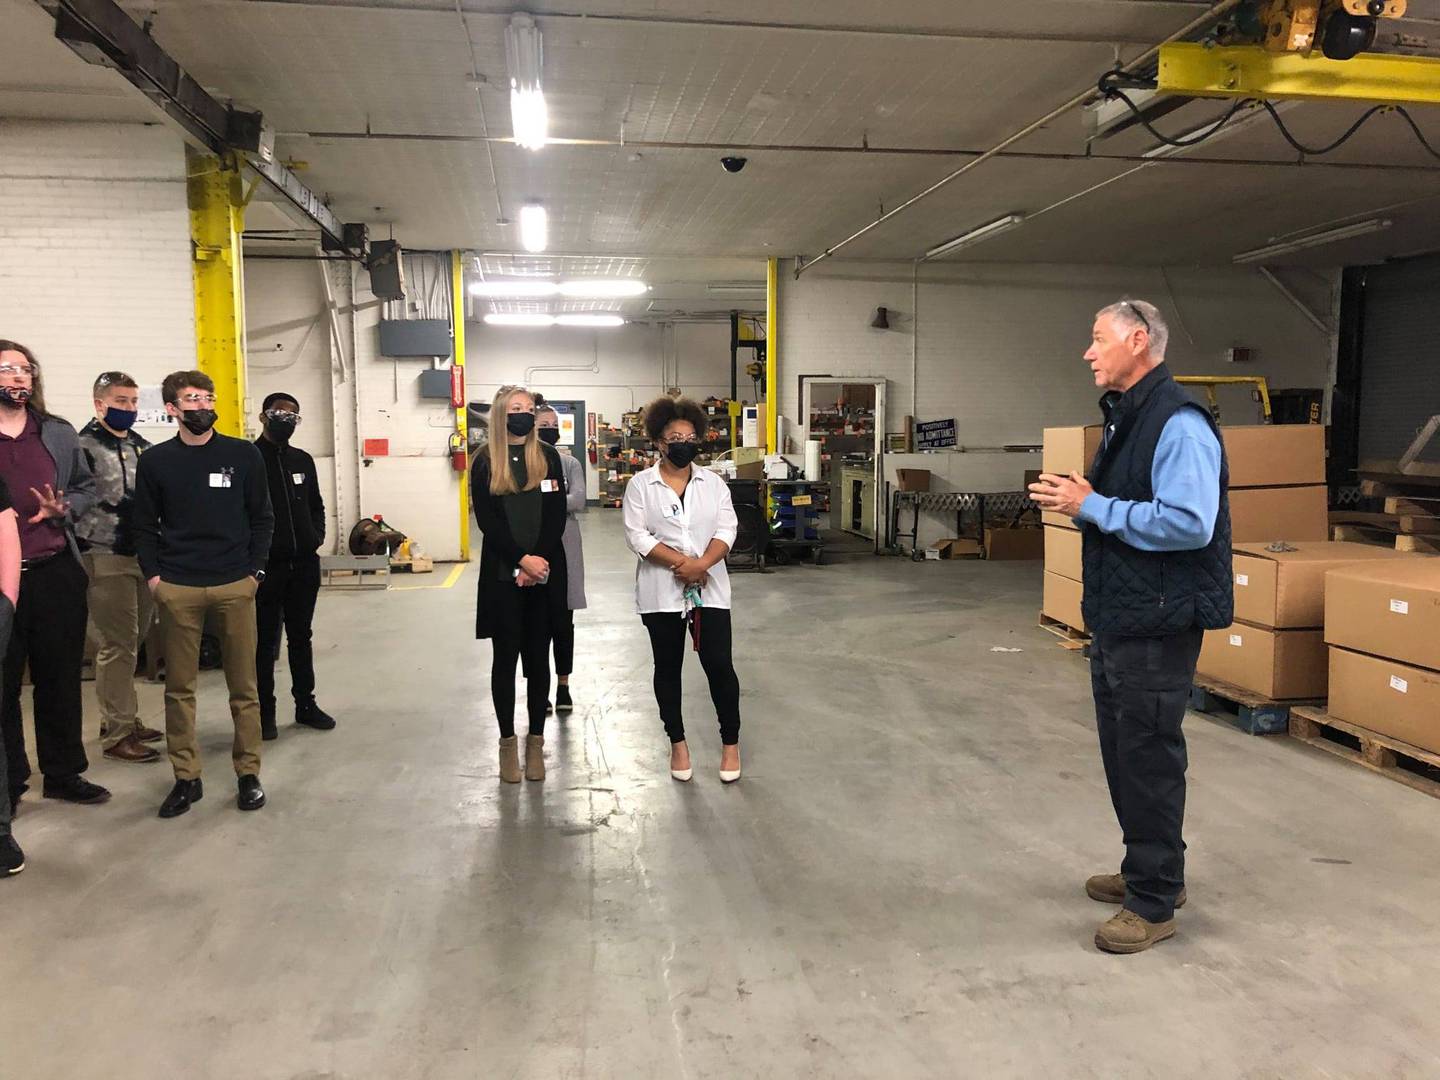 Streator Area CEO students listen to Mike Supergan, president of Teleweld, Inc and Flink Company, during a visit to the Streator industry.